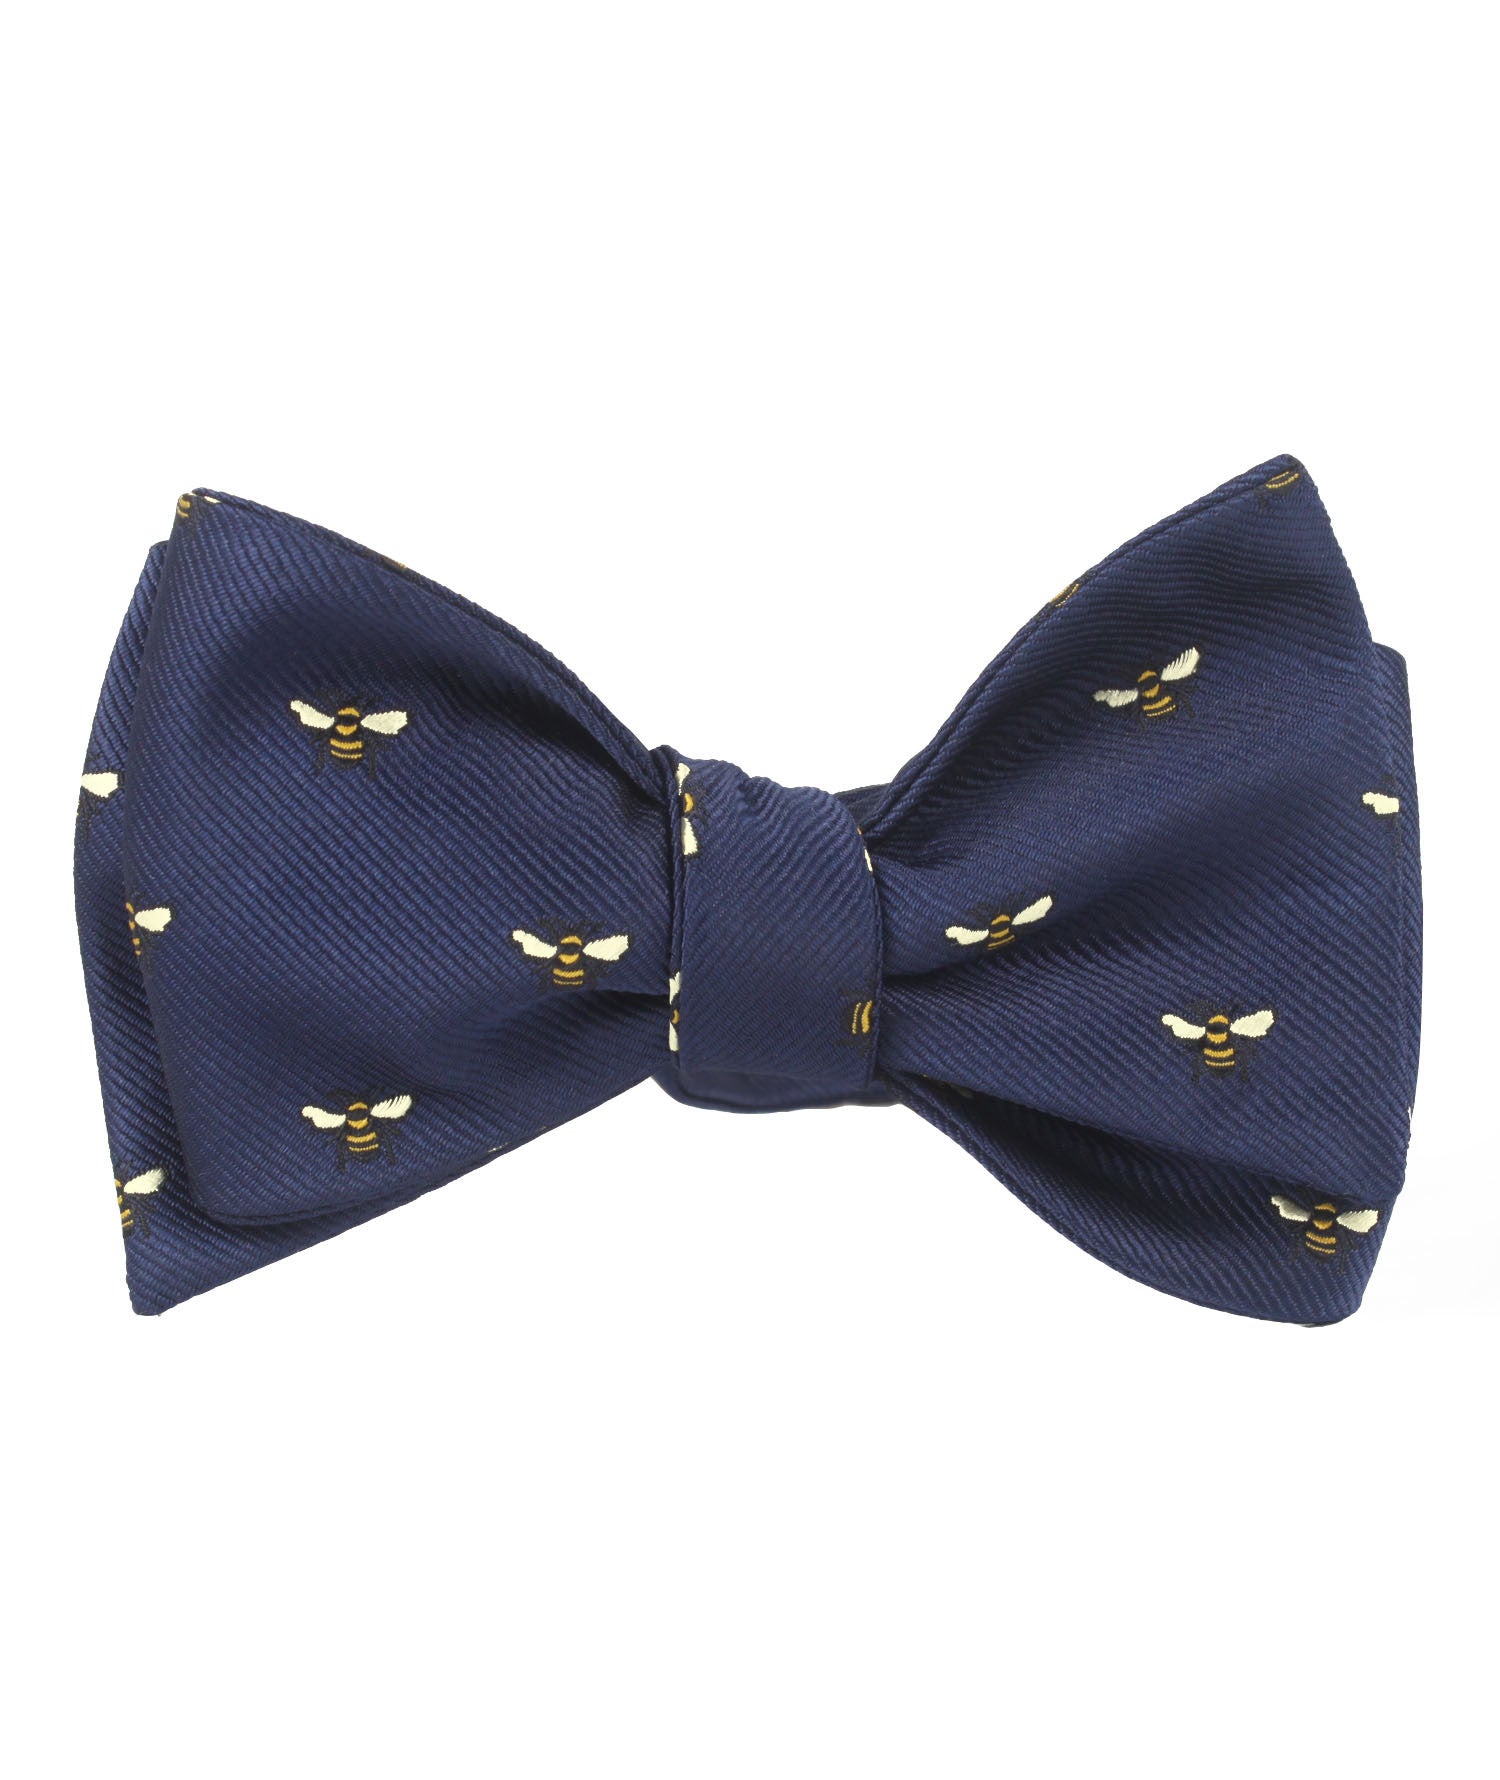 Bumble Bee Self Tied Bowtie